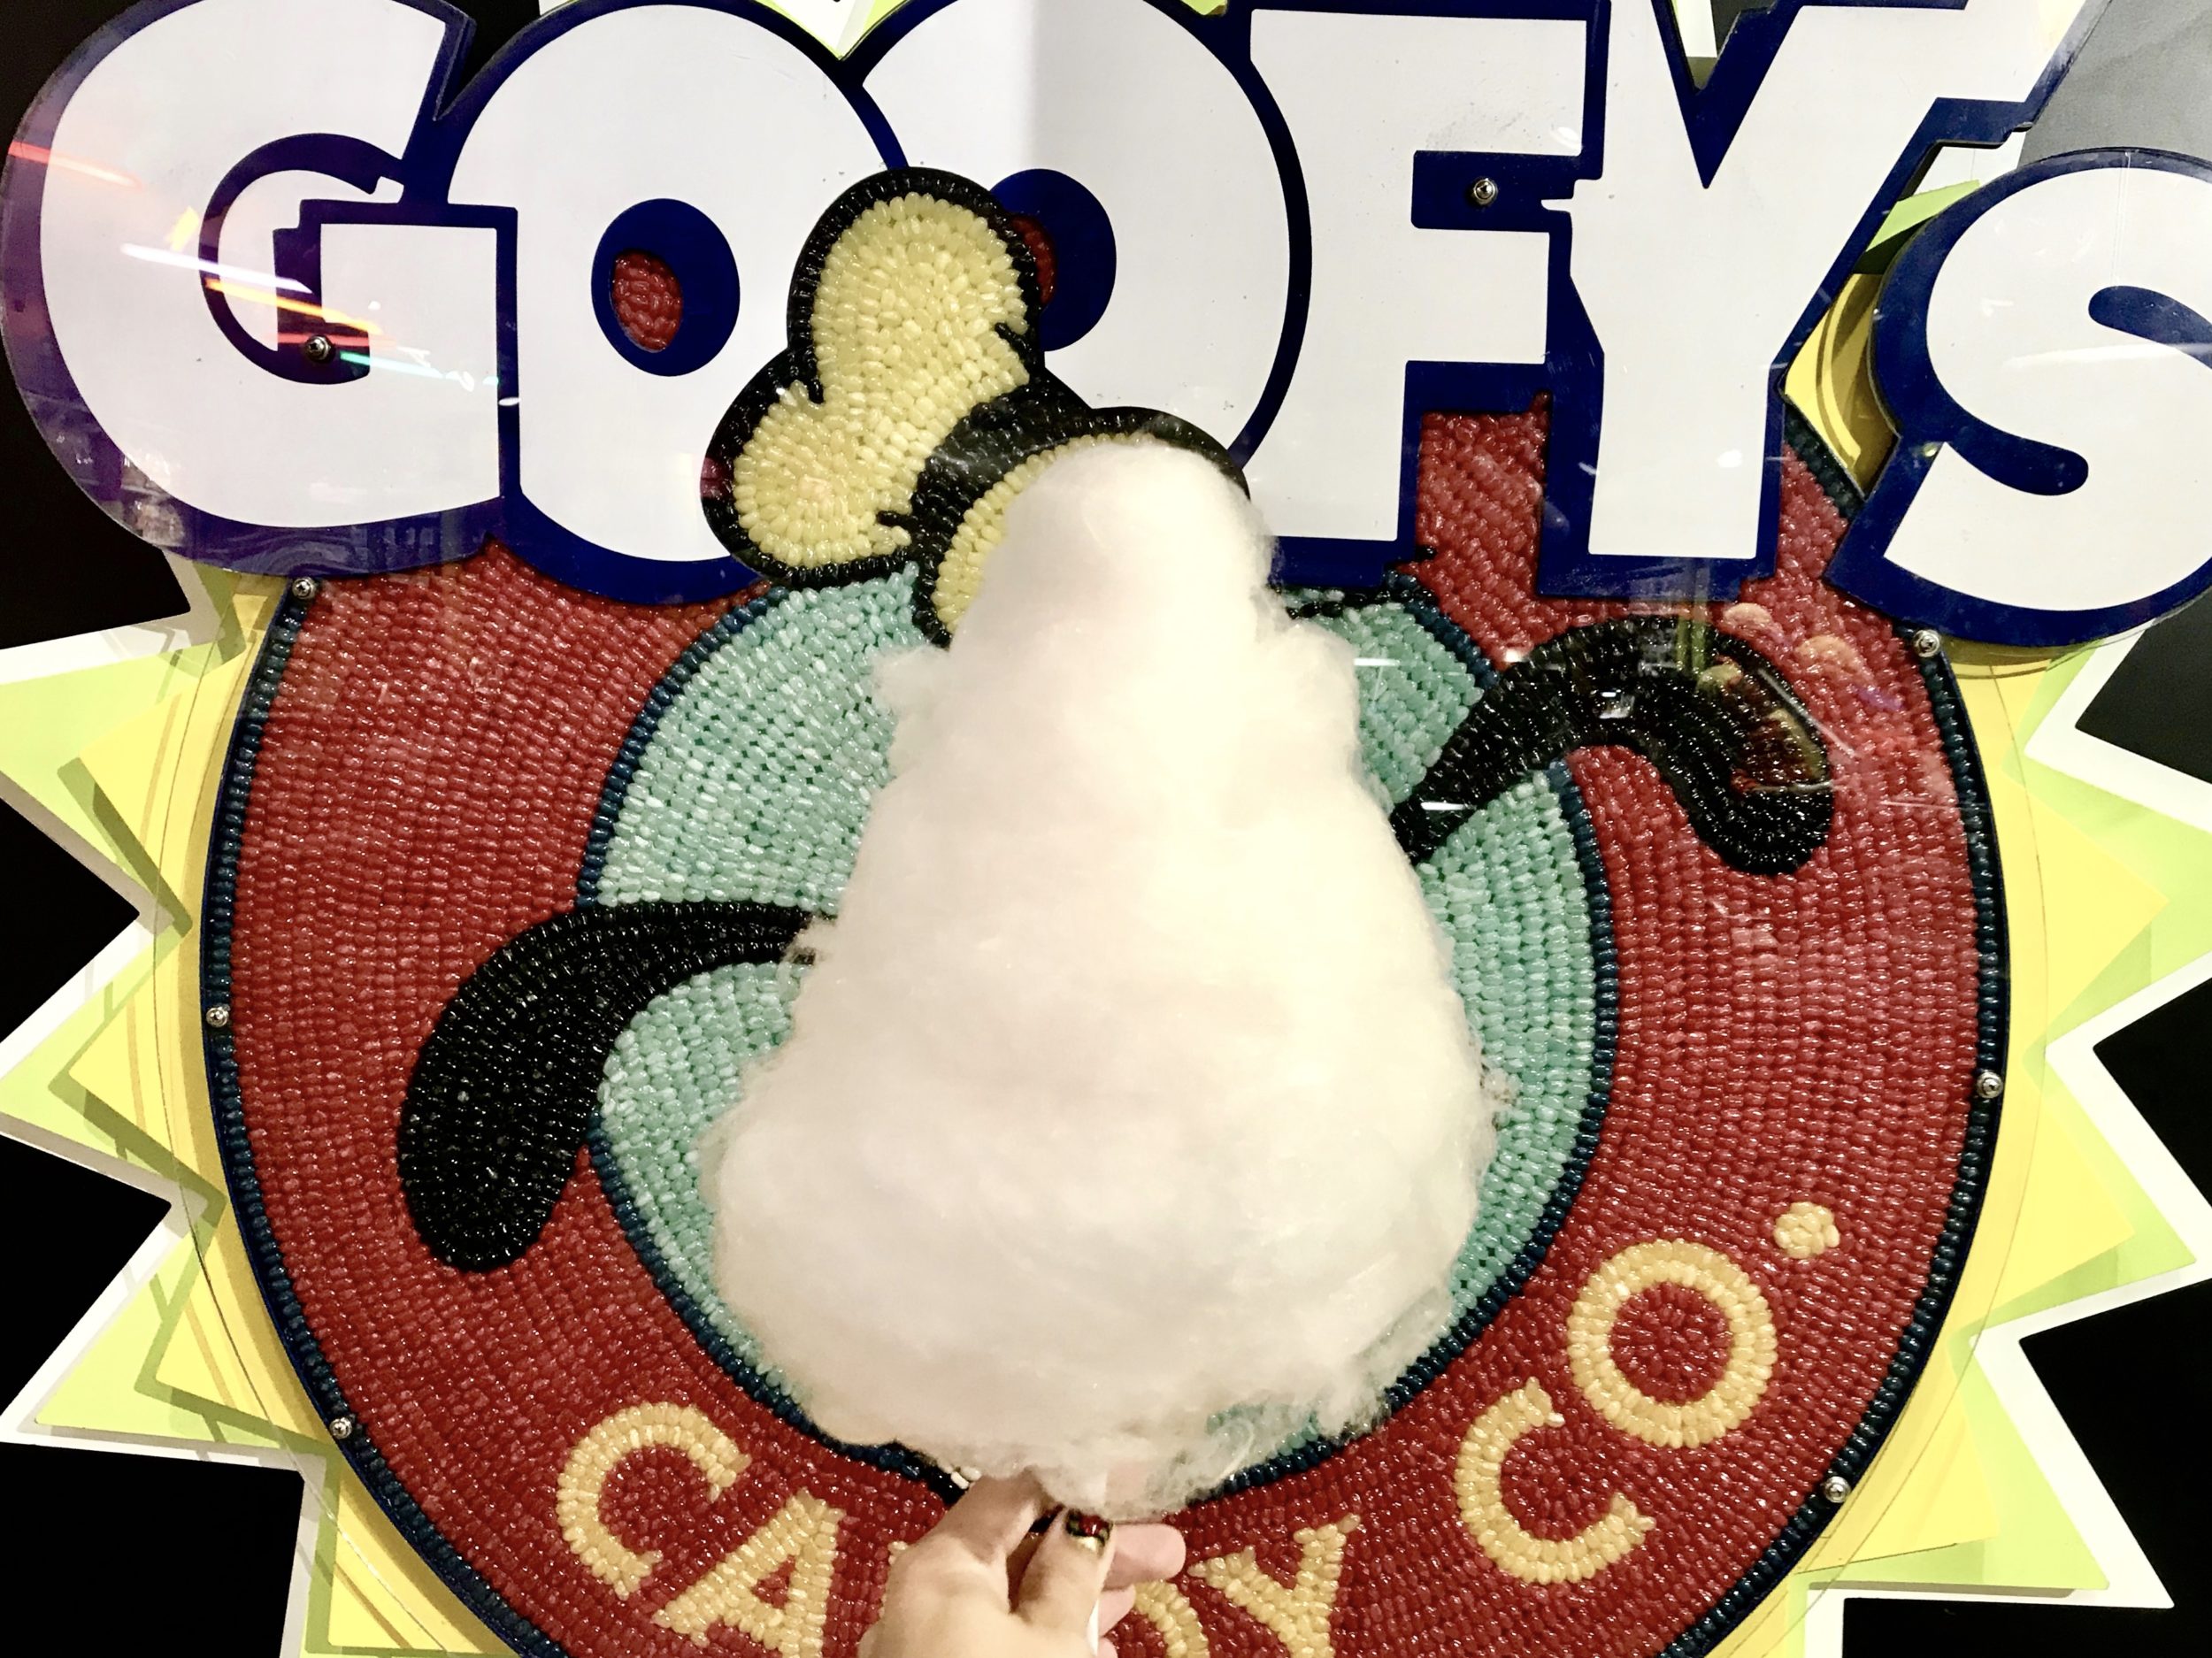 Goofy Candy Co. Offering Flavored Cotton Candy